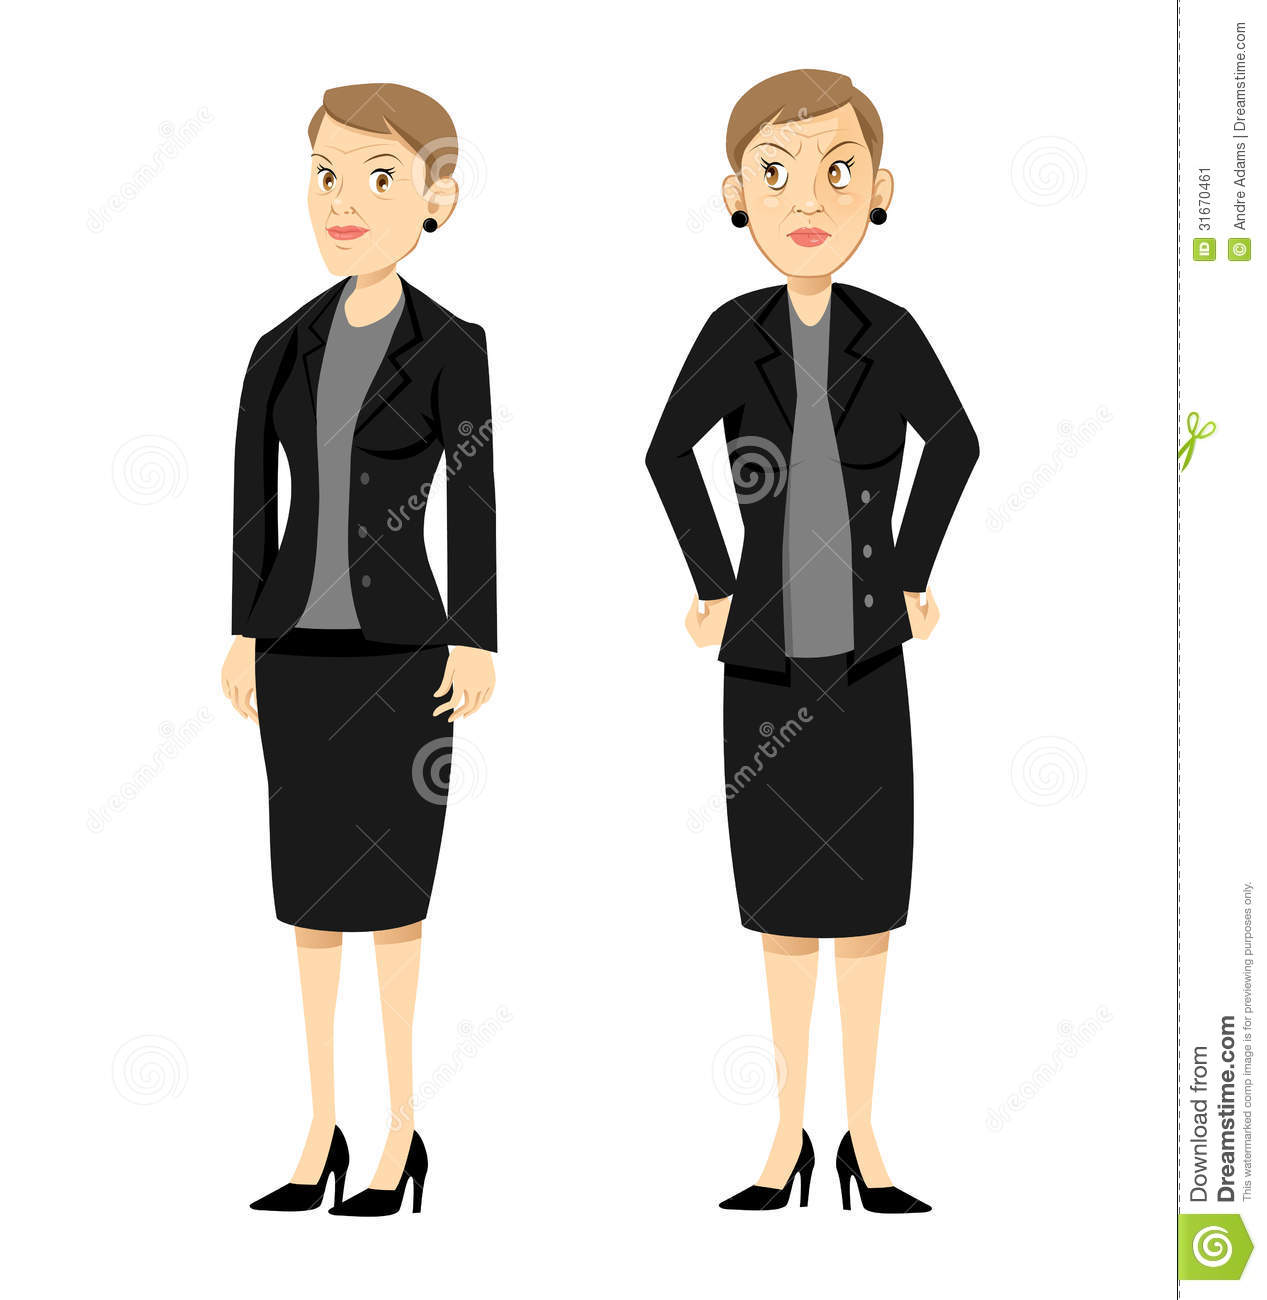     Manager Clipart  Woman Manager Clipart  Female Manager Cartoon